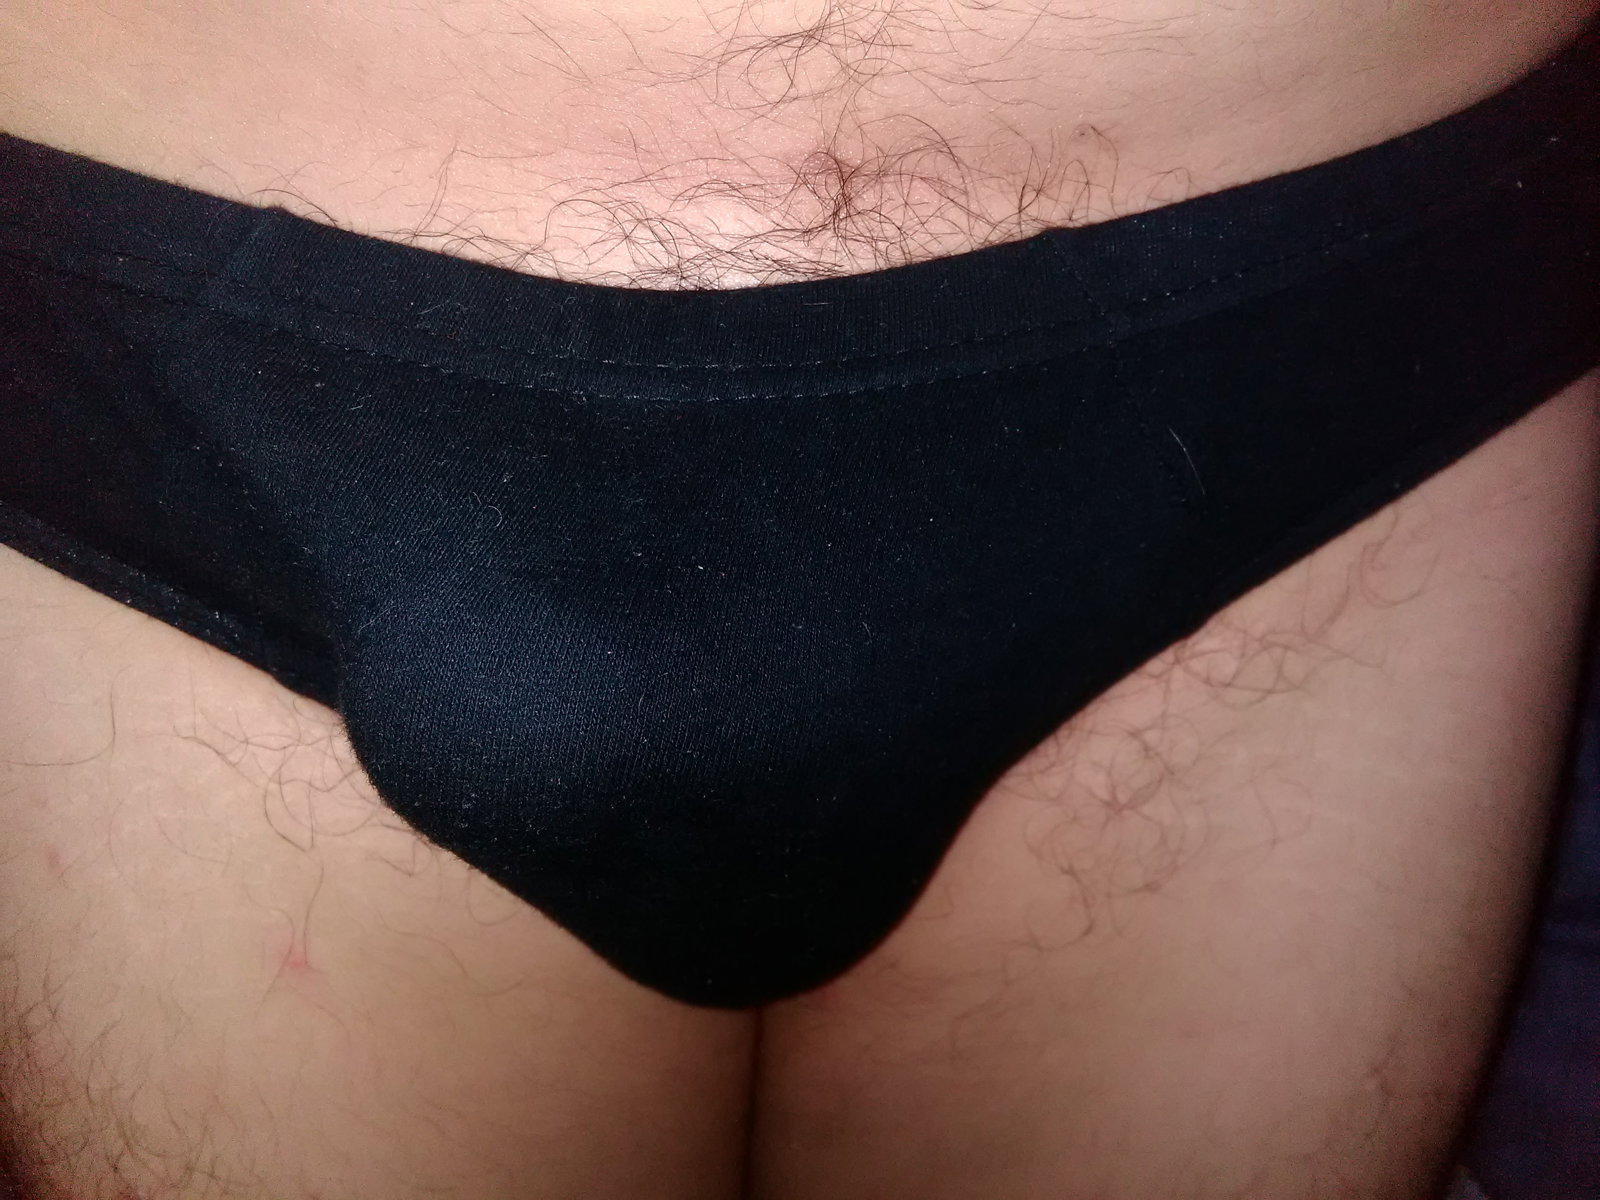 Watch the Photo by CarlFerguson with the username @CamilaPenis, posted on March 12, 2020. The post is about the topic Cocks with foreskin. and the text says 'Cute

#fimosis #phimosis #fimose #foreskin #prepuce #prepucio #underwear #underpants #bulge'